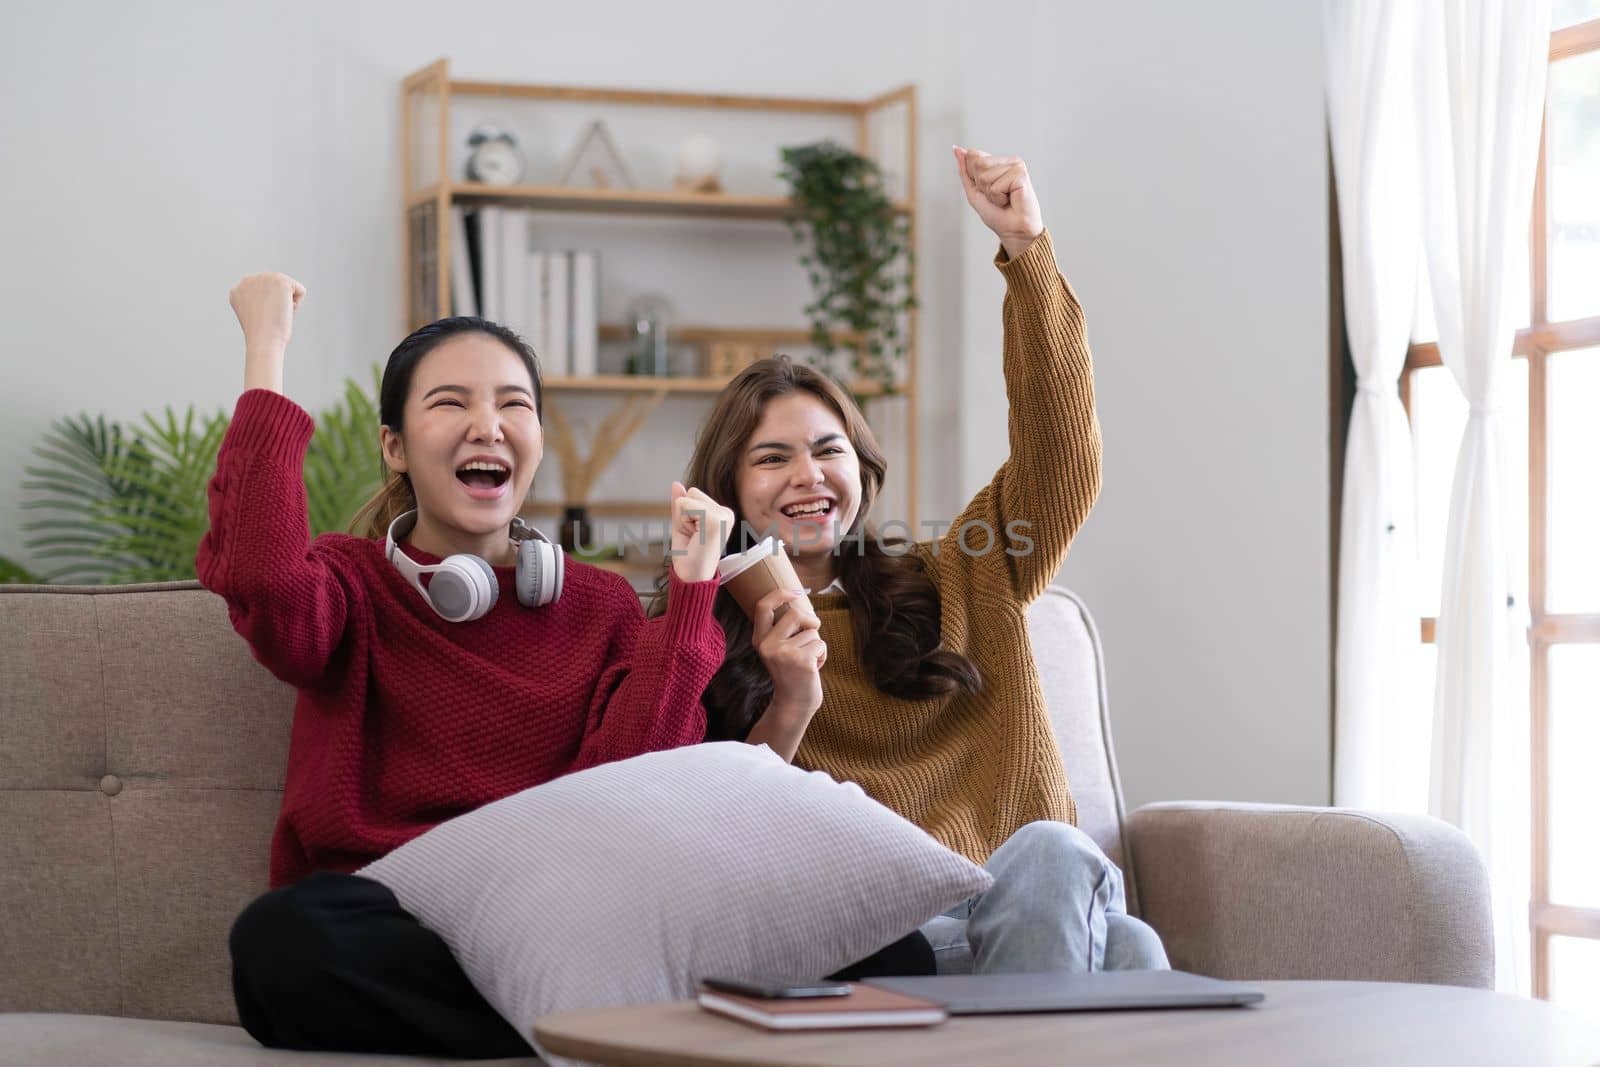 Two Young womanWatching TV Shaking Fists In Joy Celebrating Victory Of Favorite Sport Team Sitting On Couch In Living Room At Home. Weekend Leisure, Television Show And Entertainment Concept.